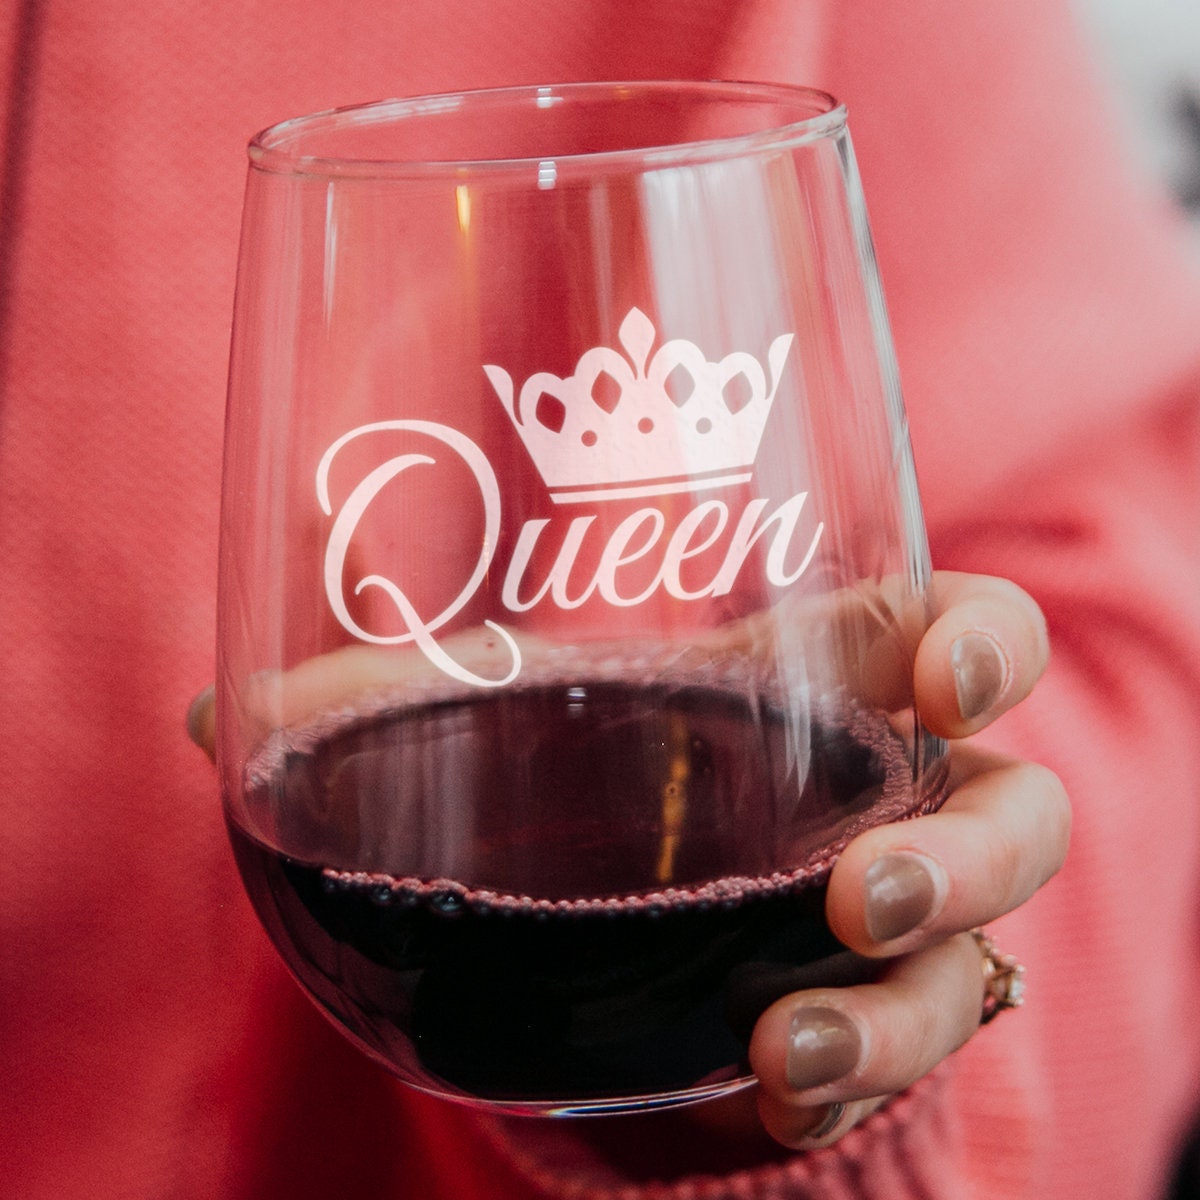 Queen – Cute Funny Stemless Wine Glass, Large Glasses, Etched